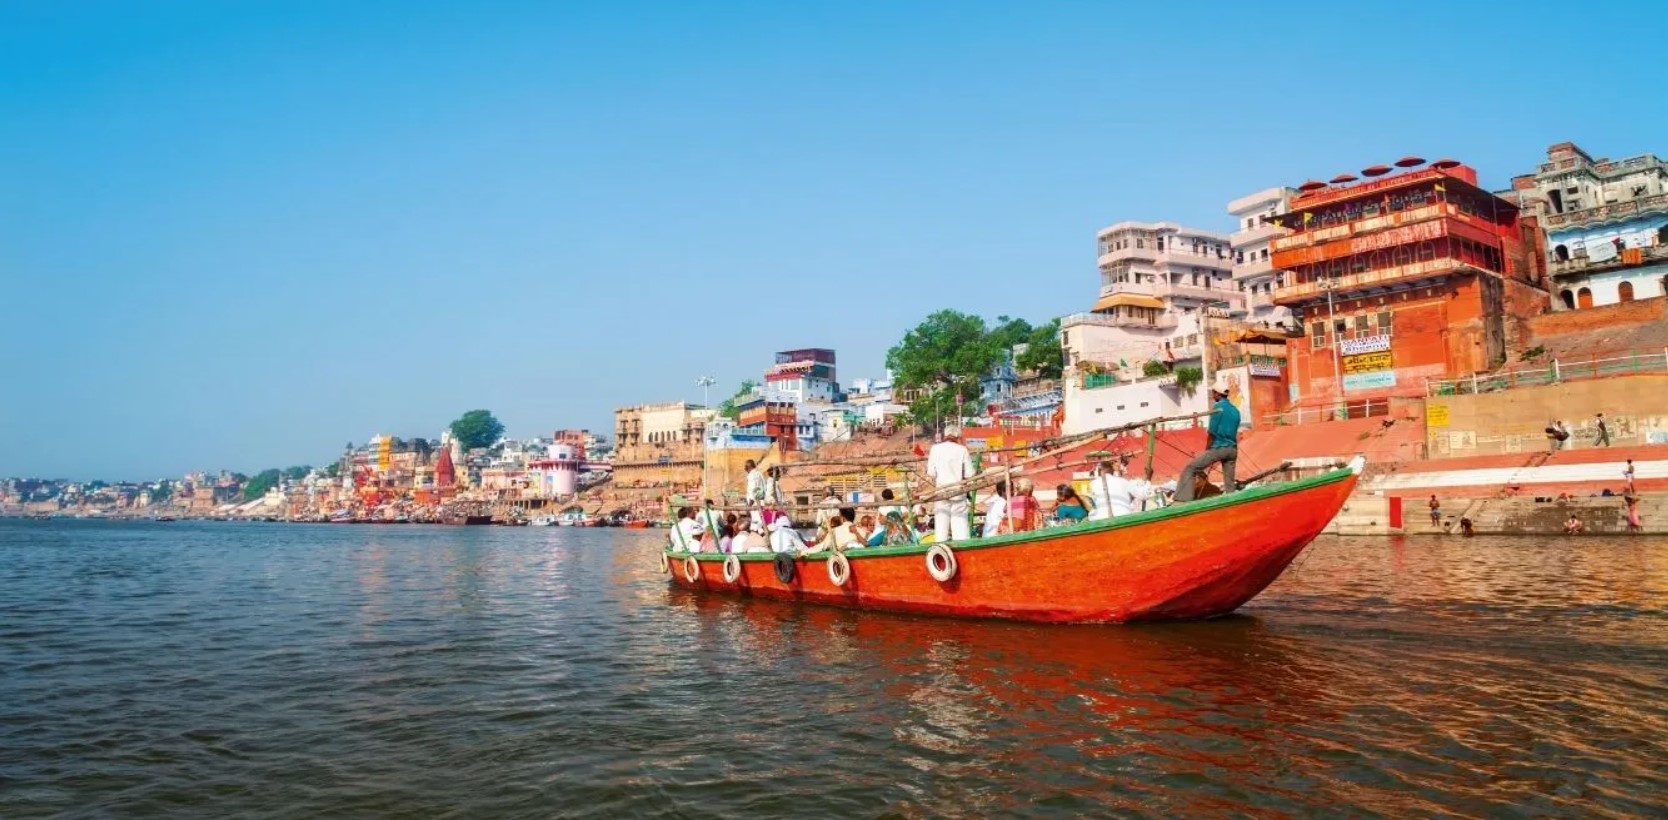 Fun Things to do with Friends in Varanasi